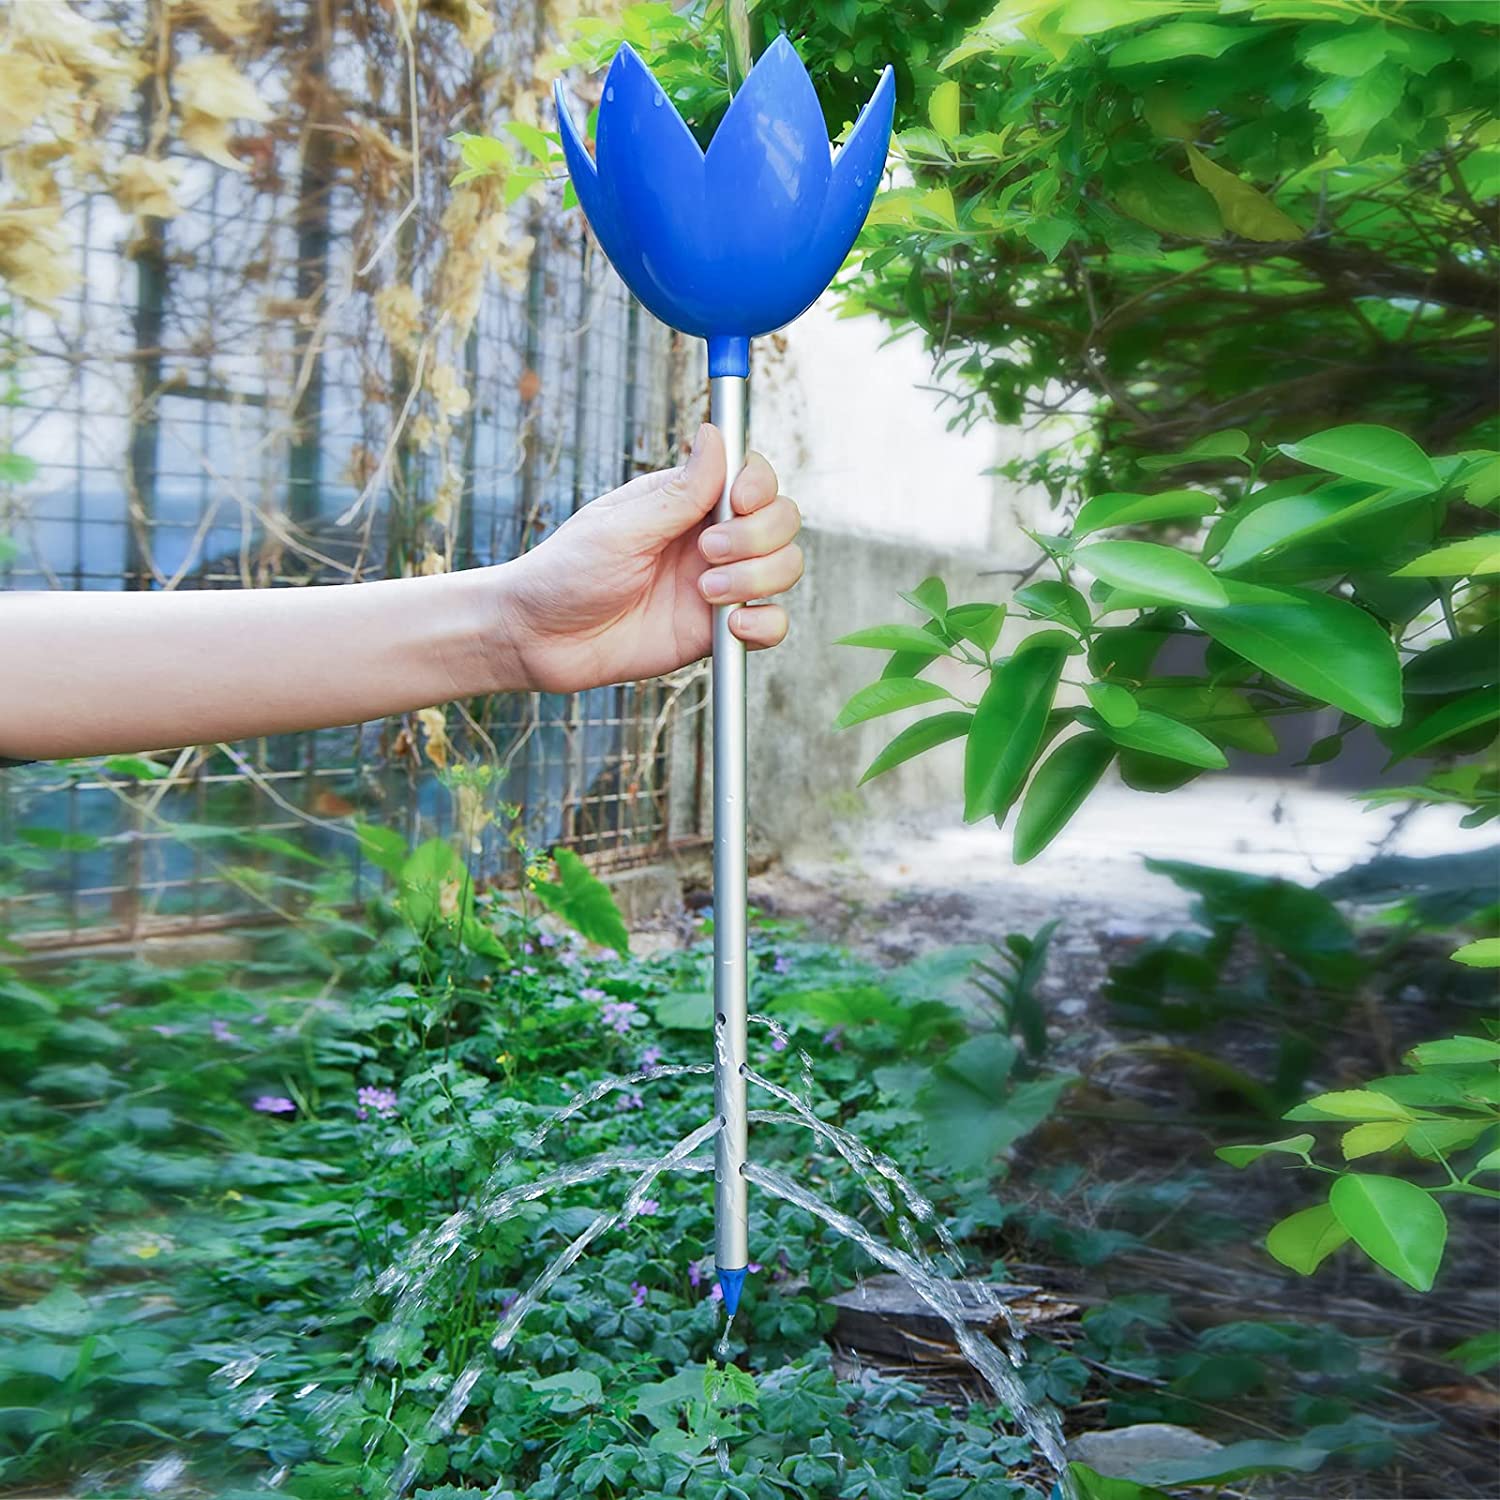 Decorative Deep Root Watering Tool,Root Watering Spike DACK Root Waterer for Gardeners,Ideal for Efficiently Watering Your Tree Garden Patio Container